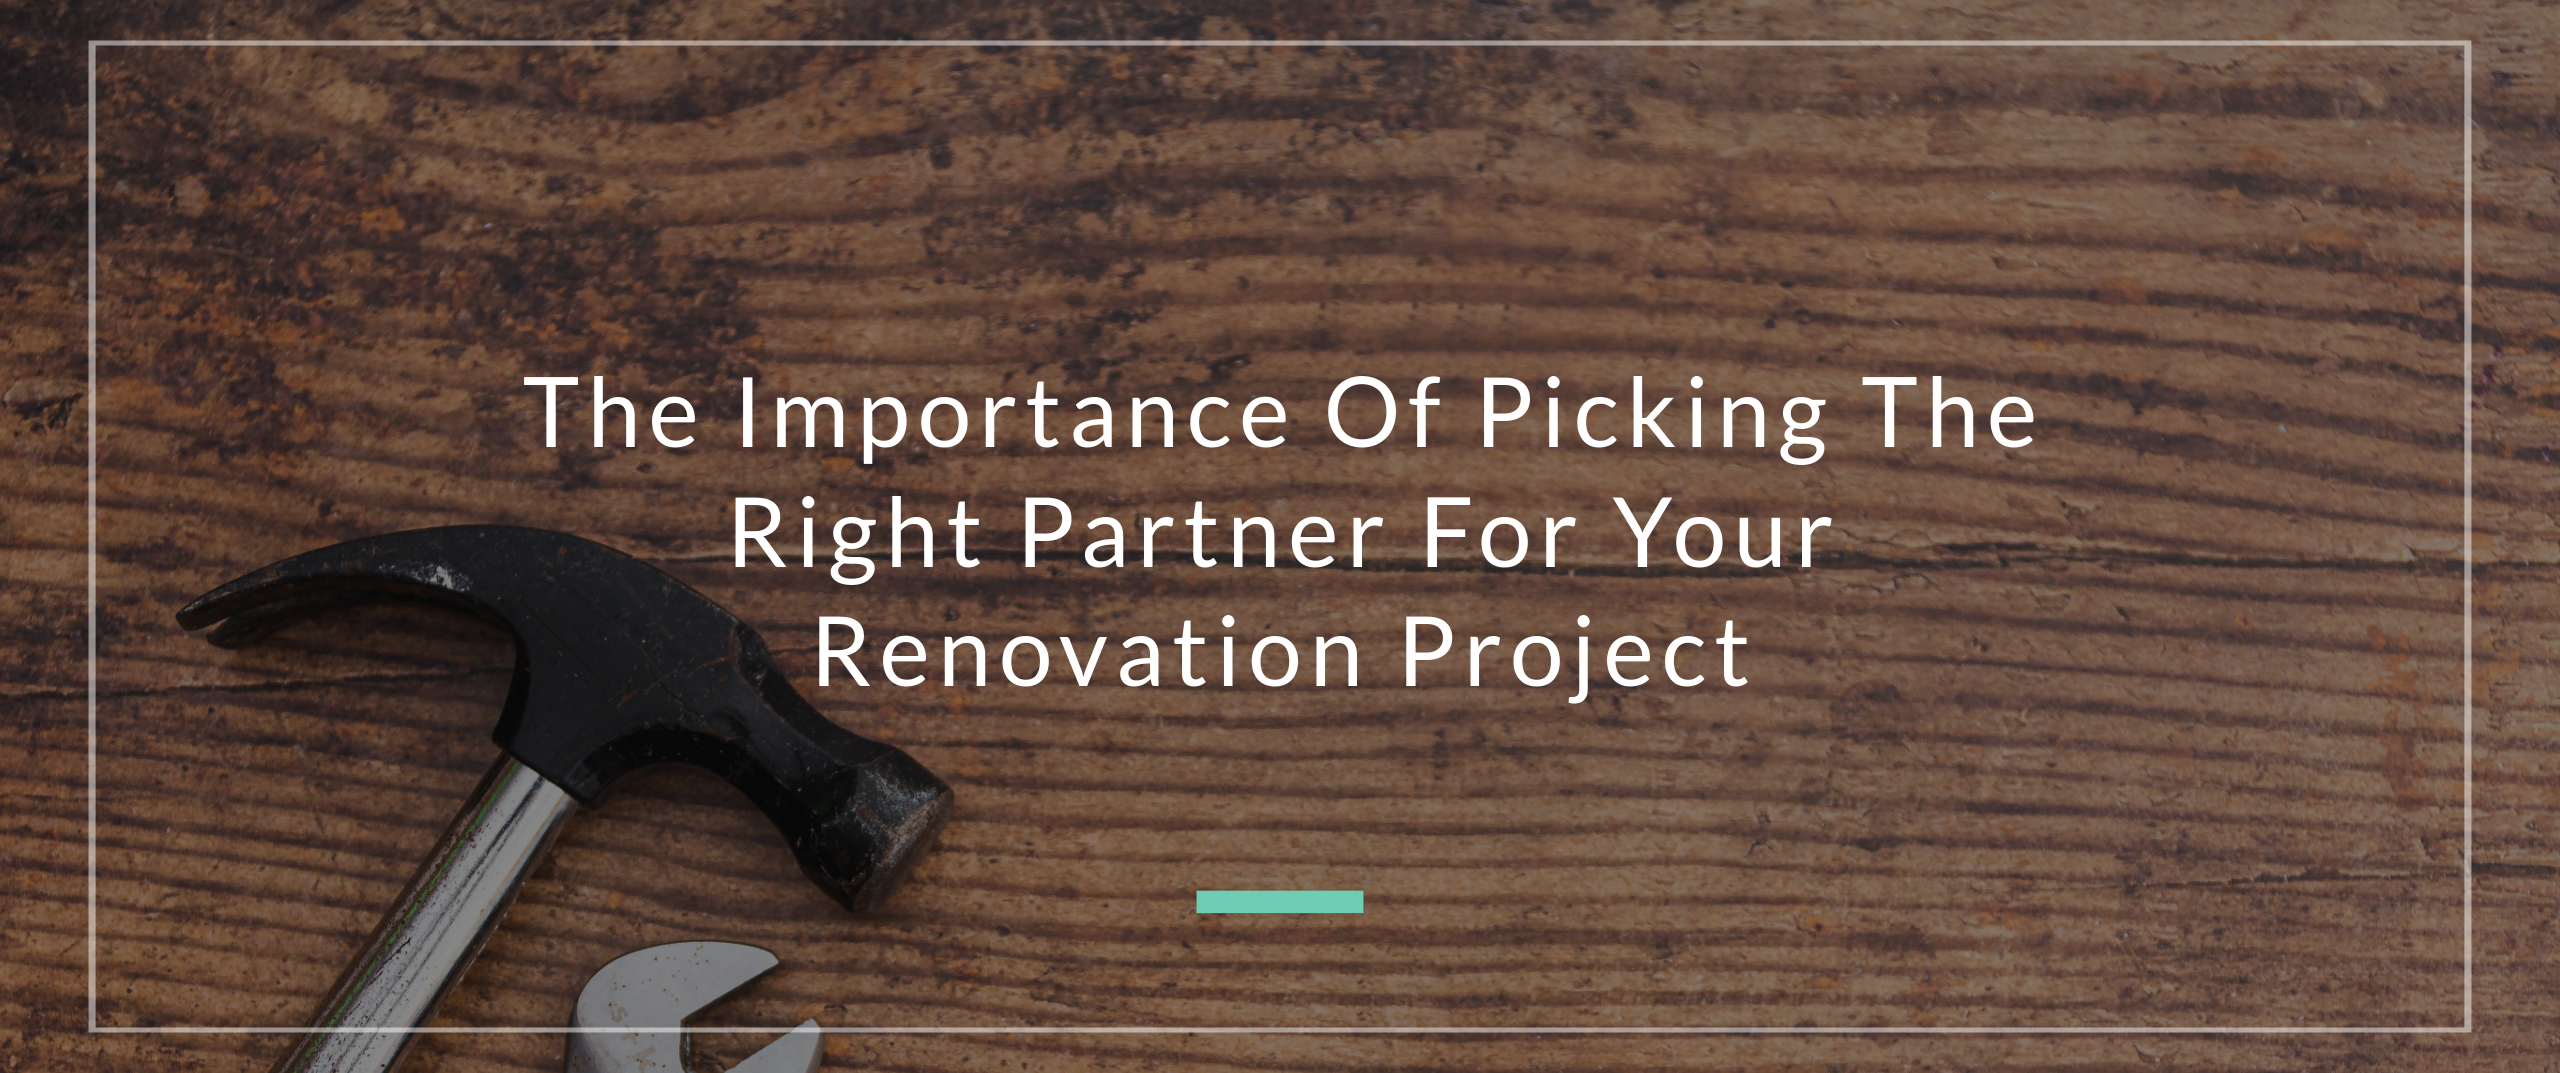 The Importance Of Picking The Right Partner For Your Renovation Project